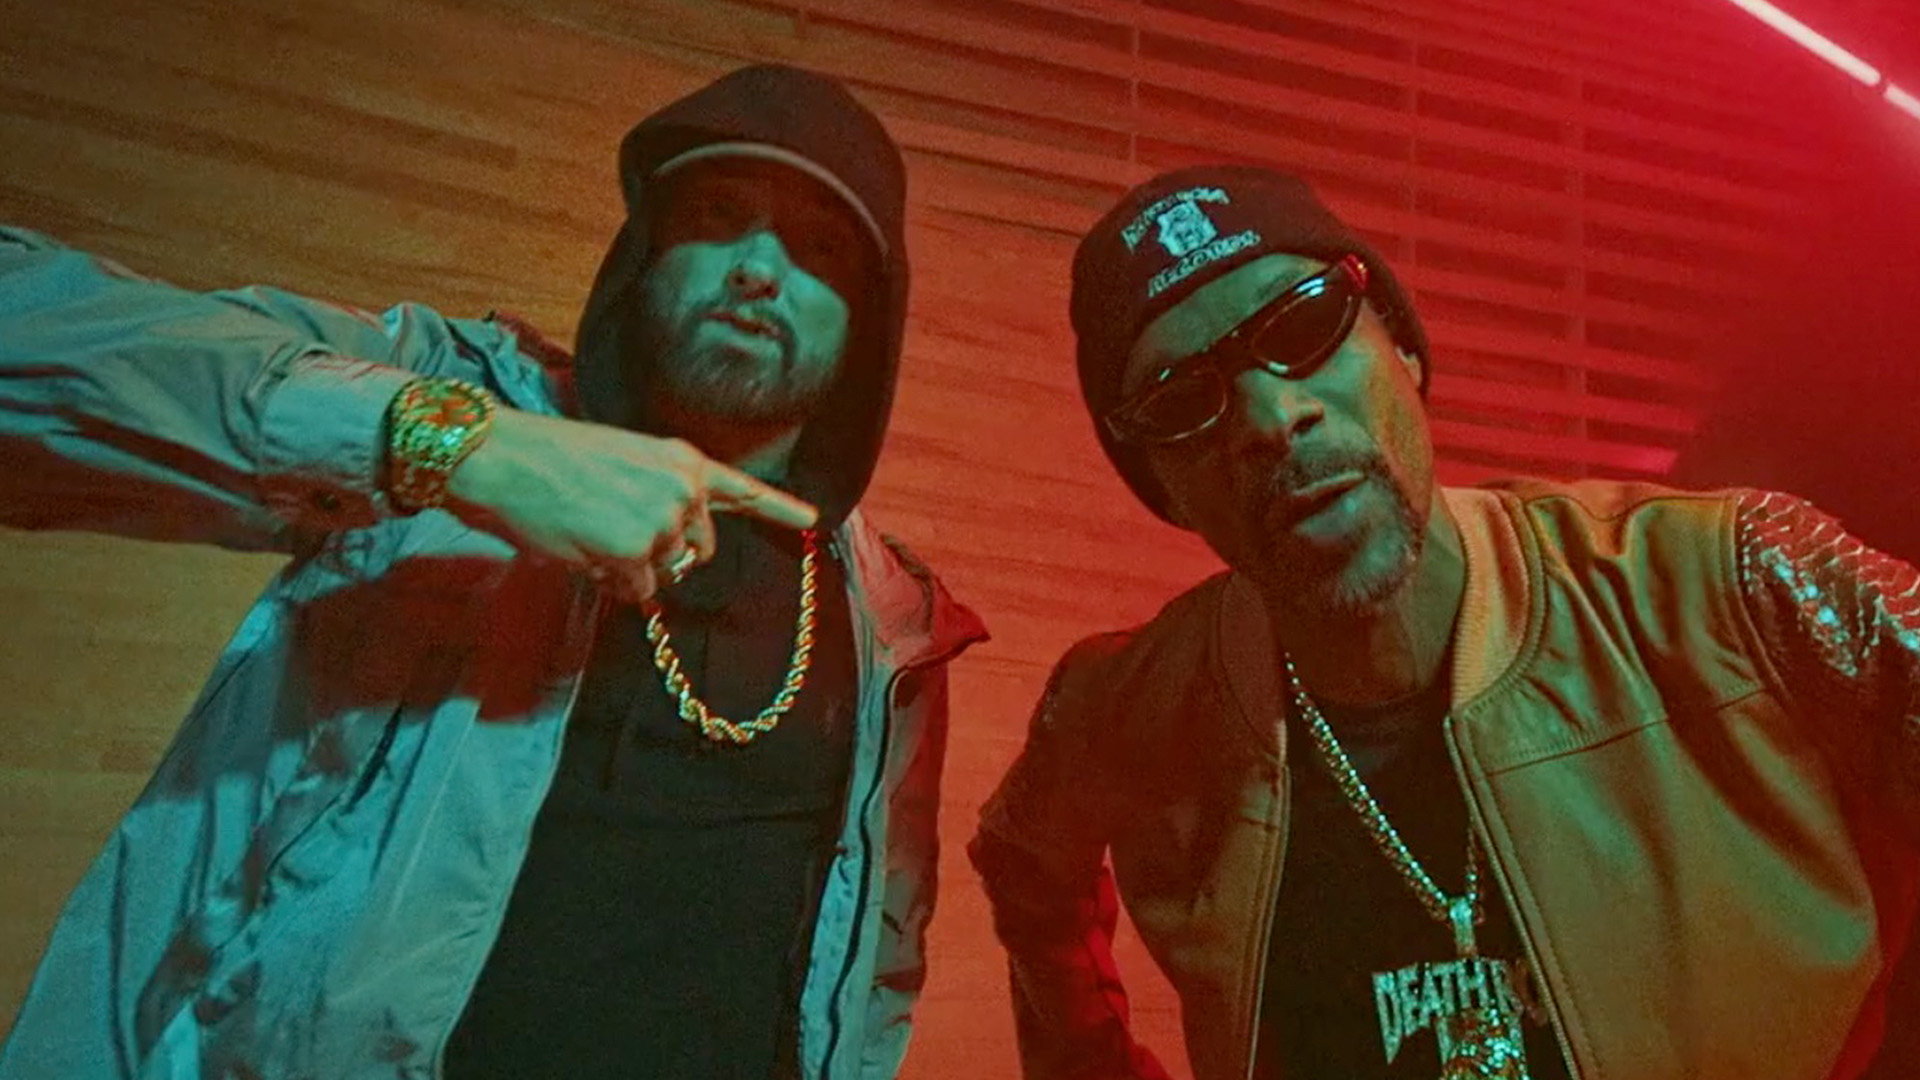 New Single from Eminem and Snoop Dogg — “From The D 2 The LBC” Out Now